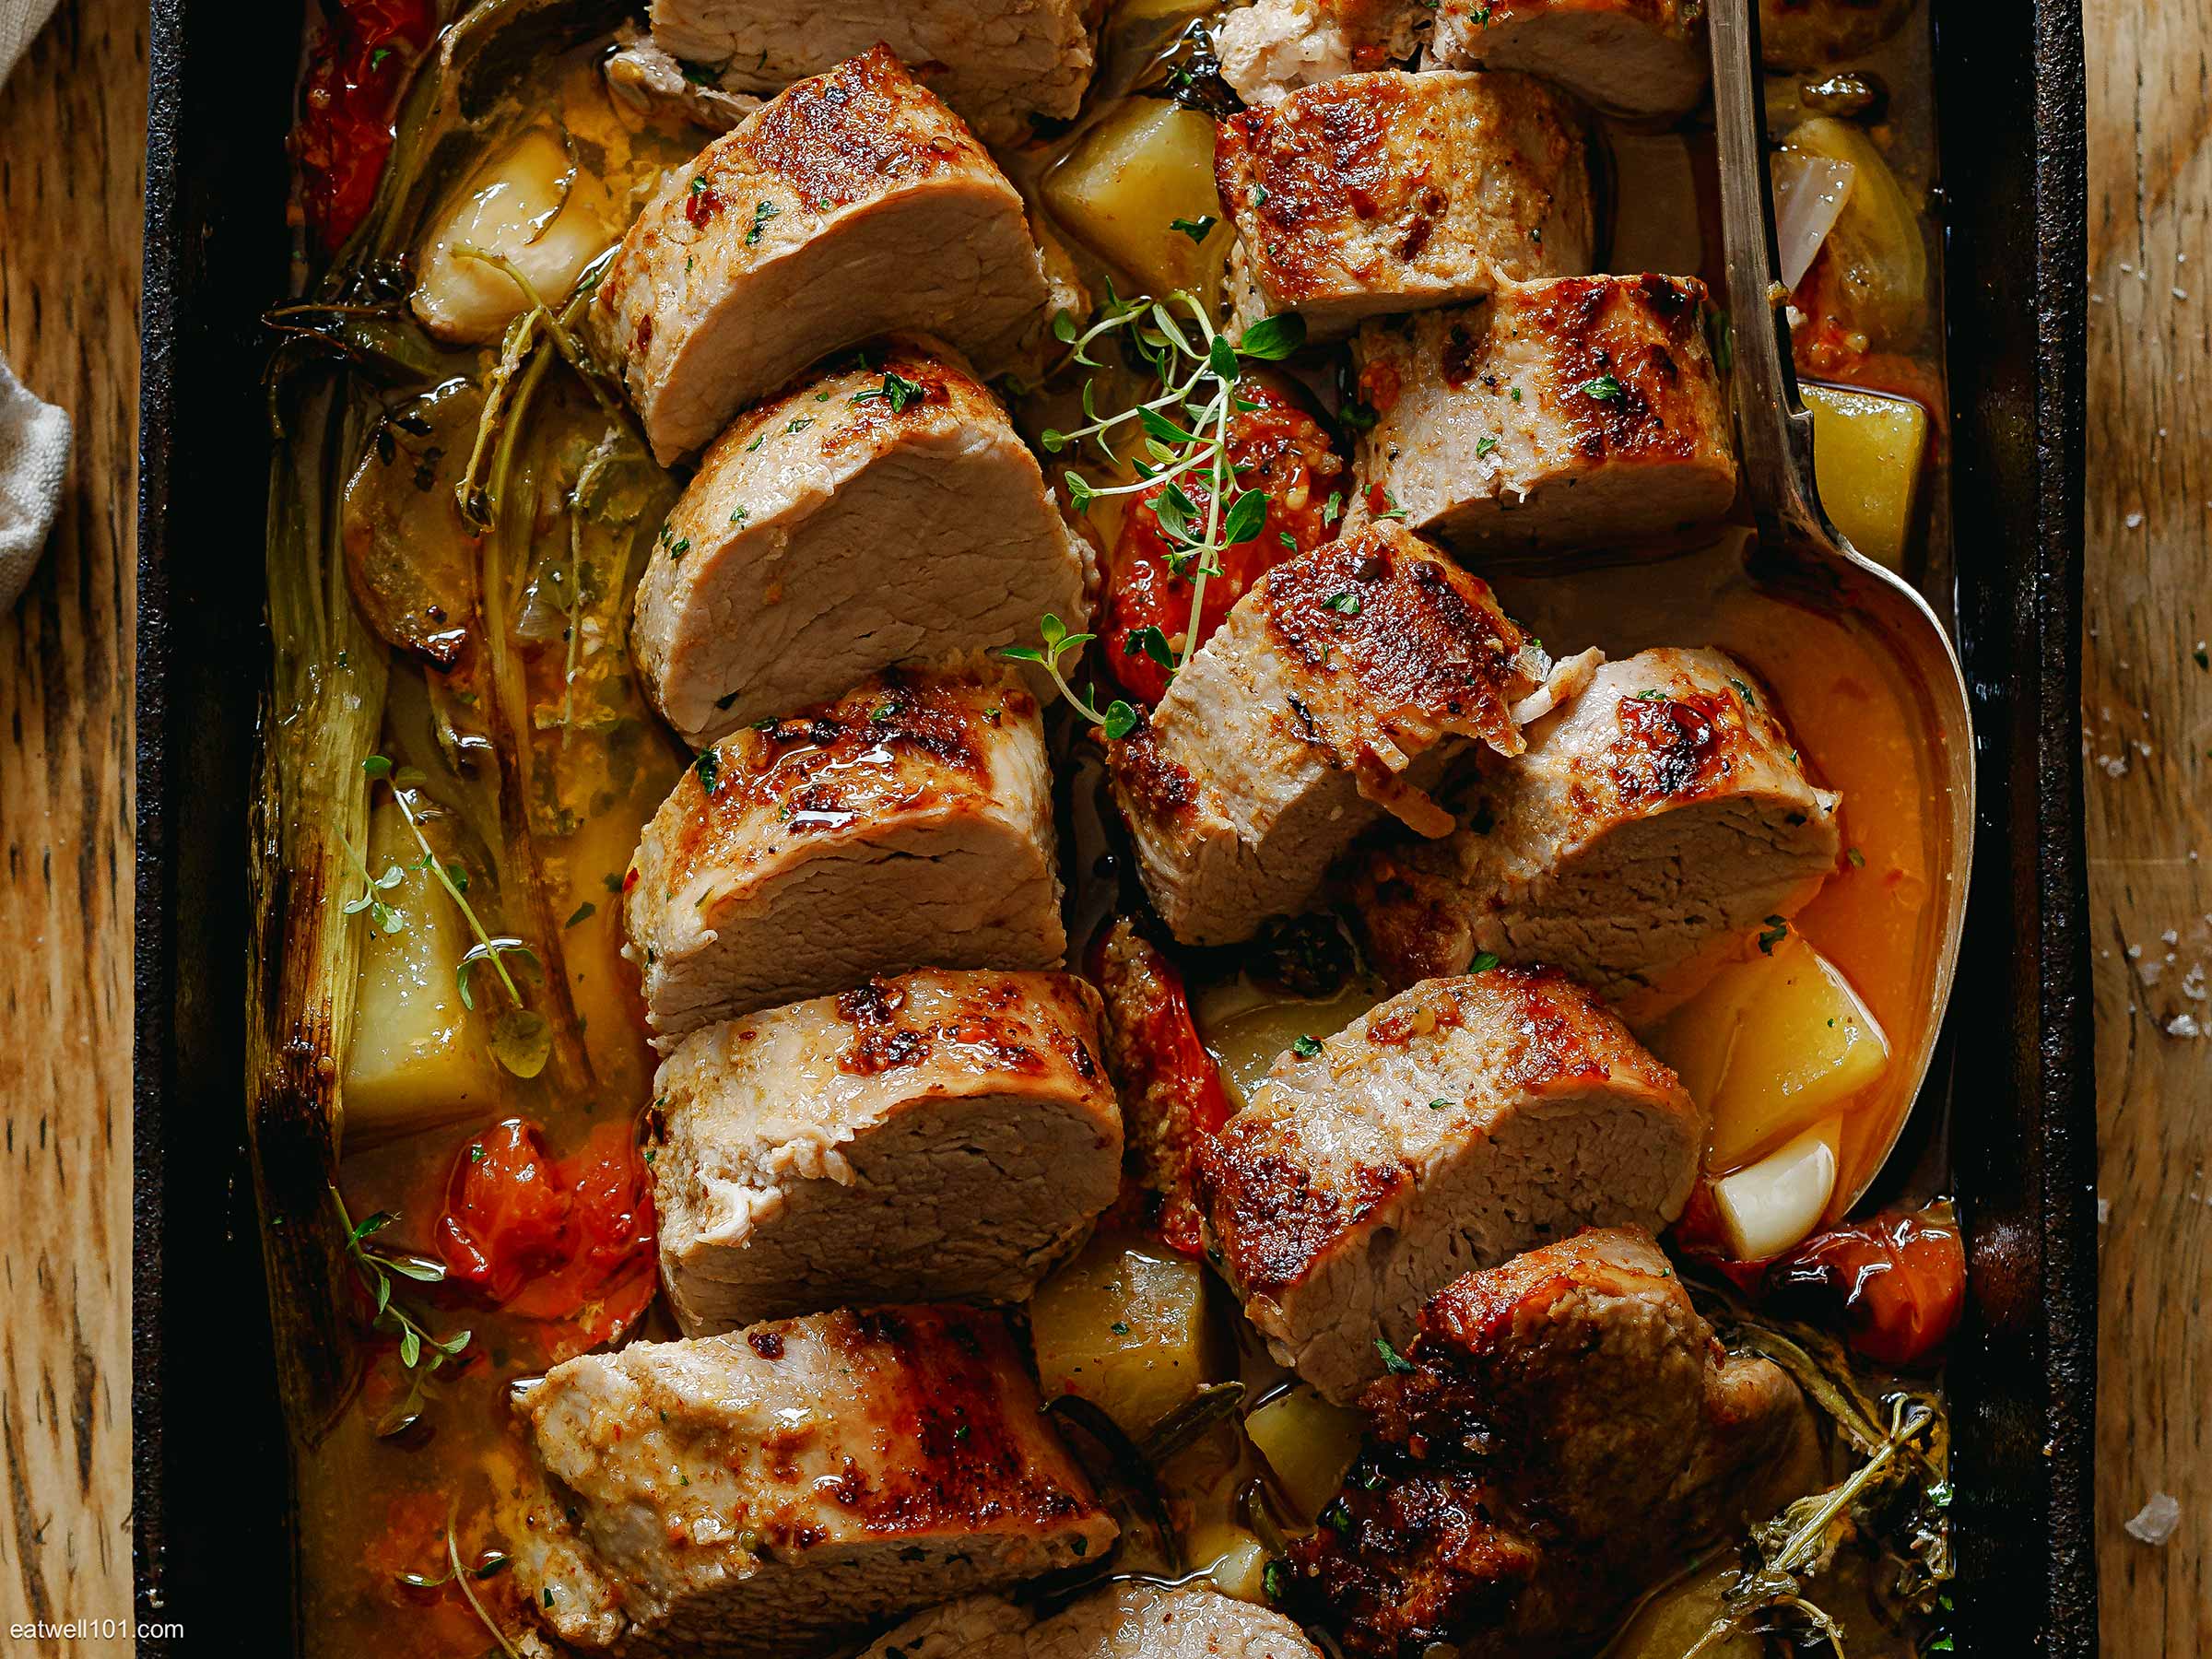 Baked Pork Tenderloin with Vegetables and Spiced Butter